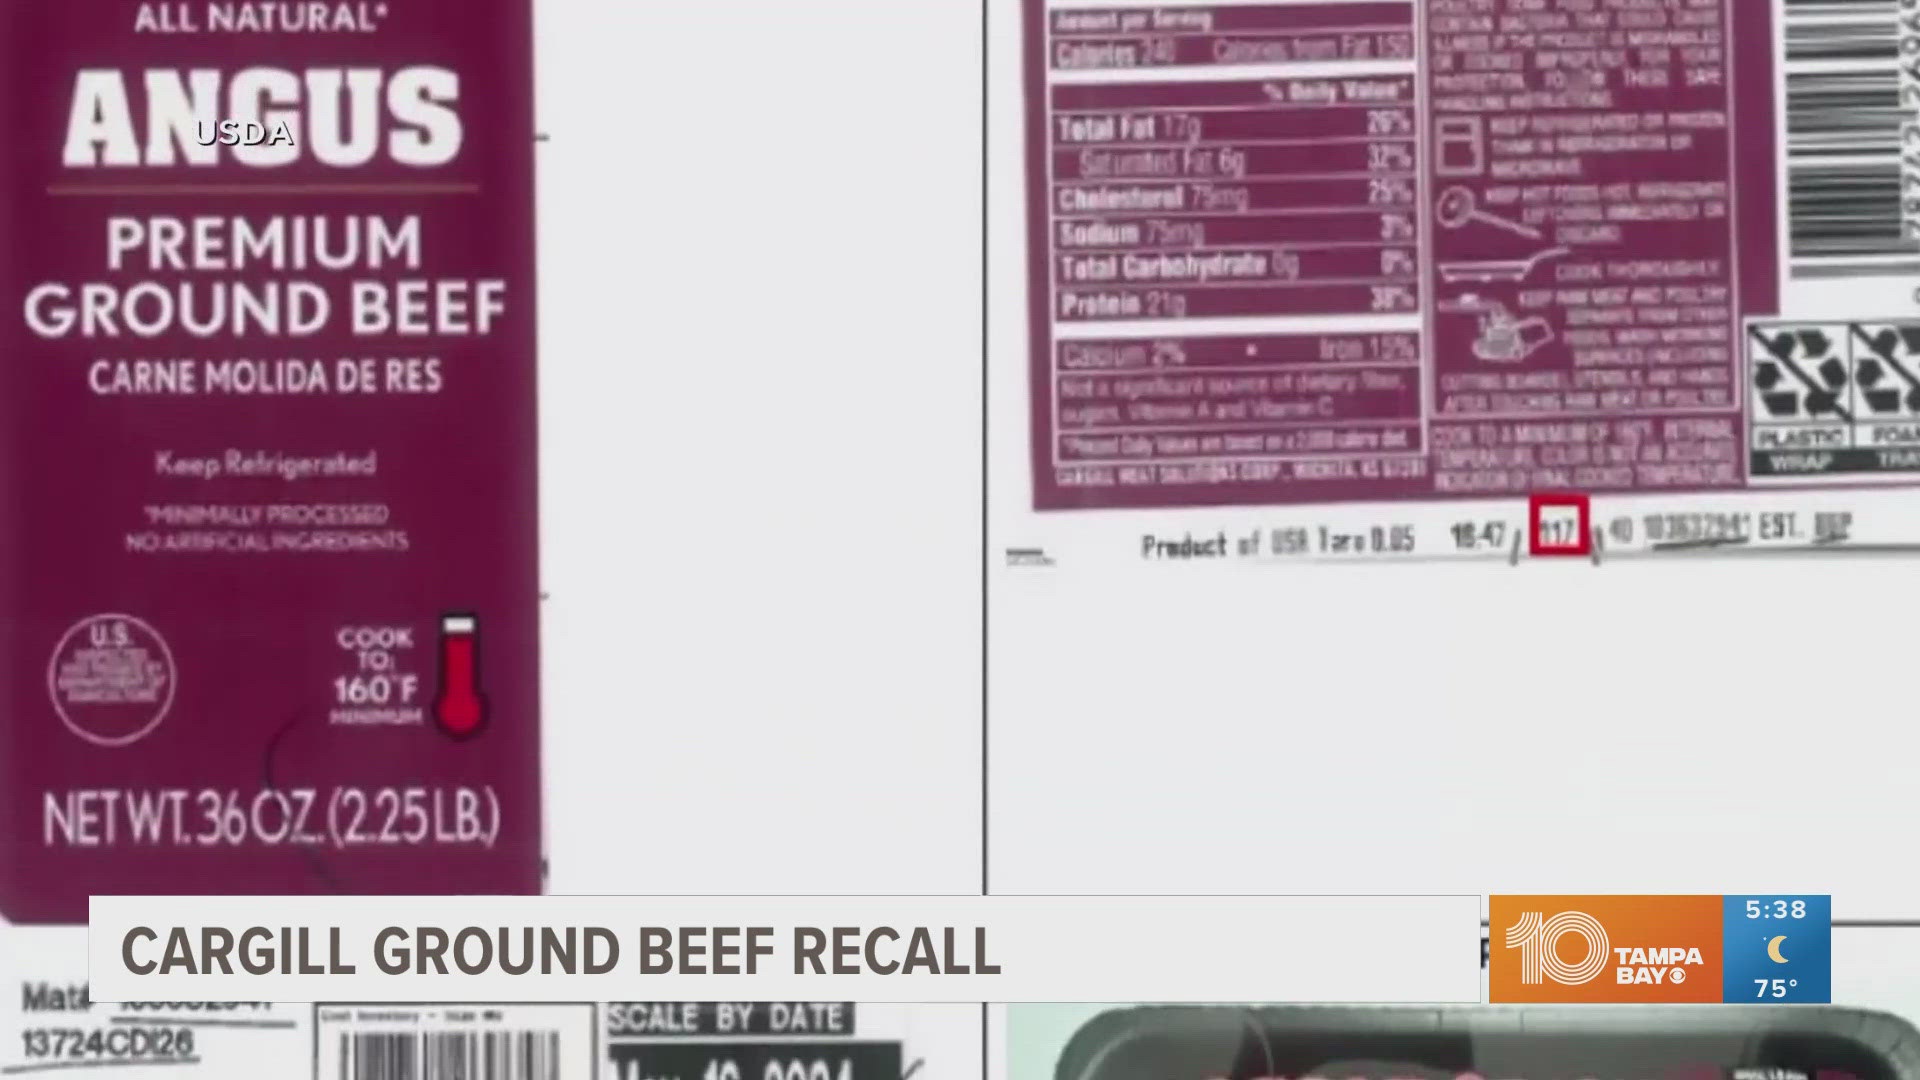 More than 16,000 pounds of raw ground beef products are being recalled due to possible contamination.